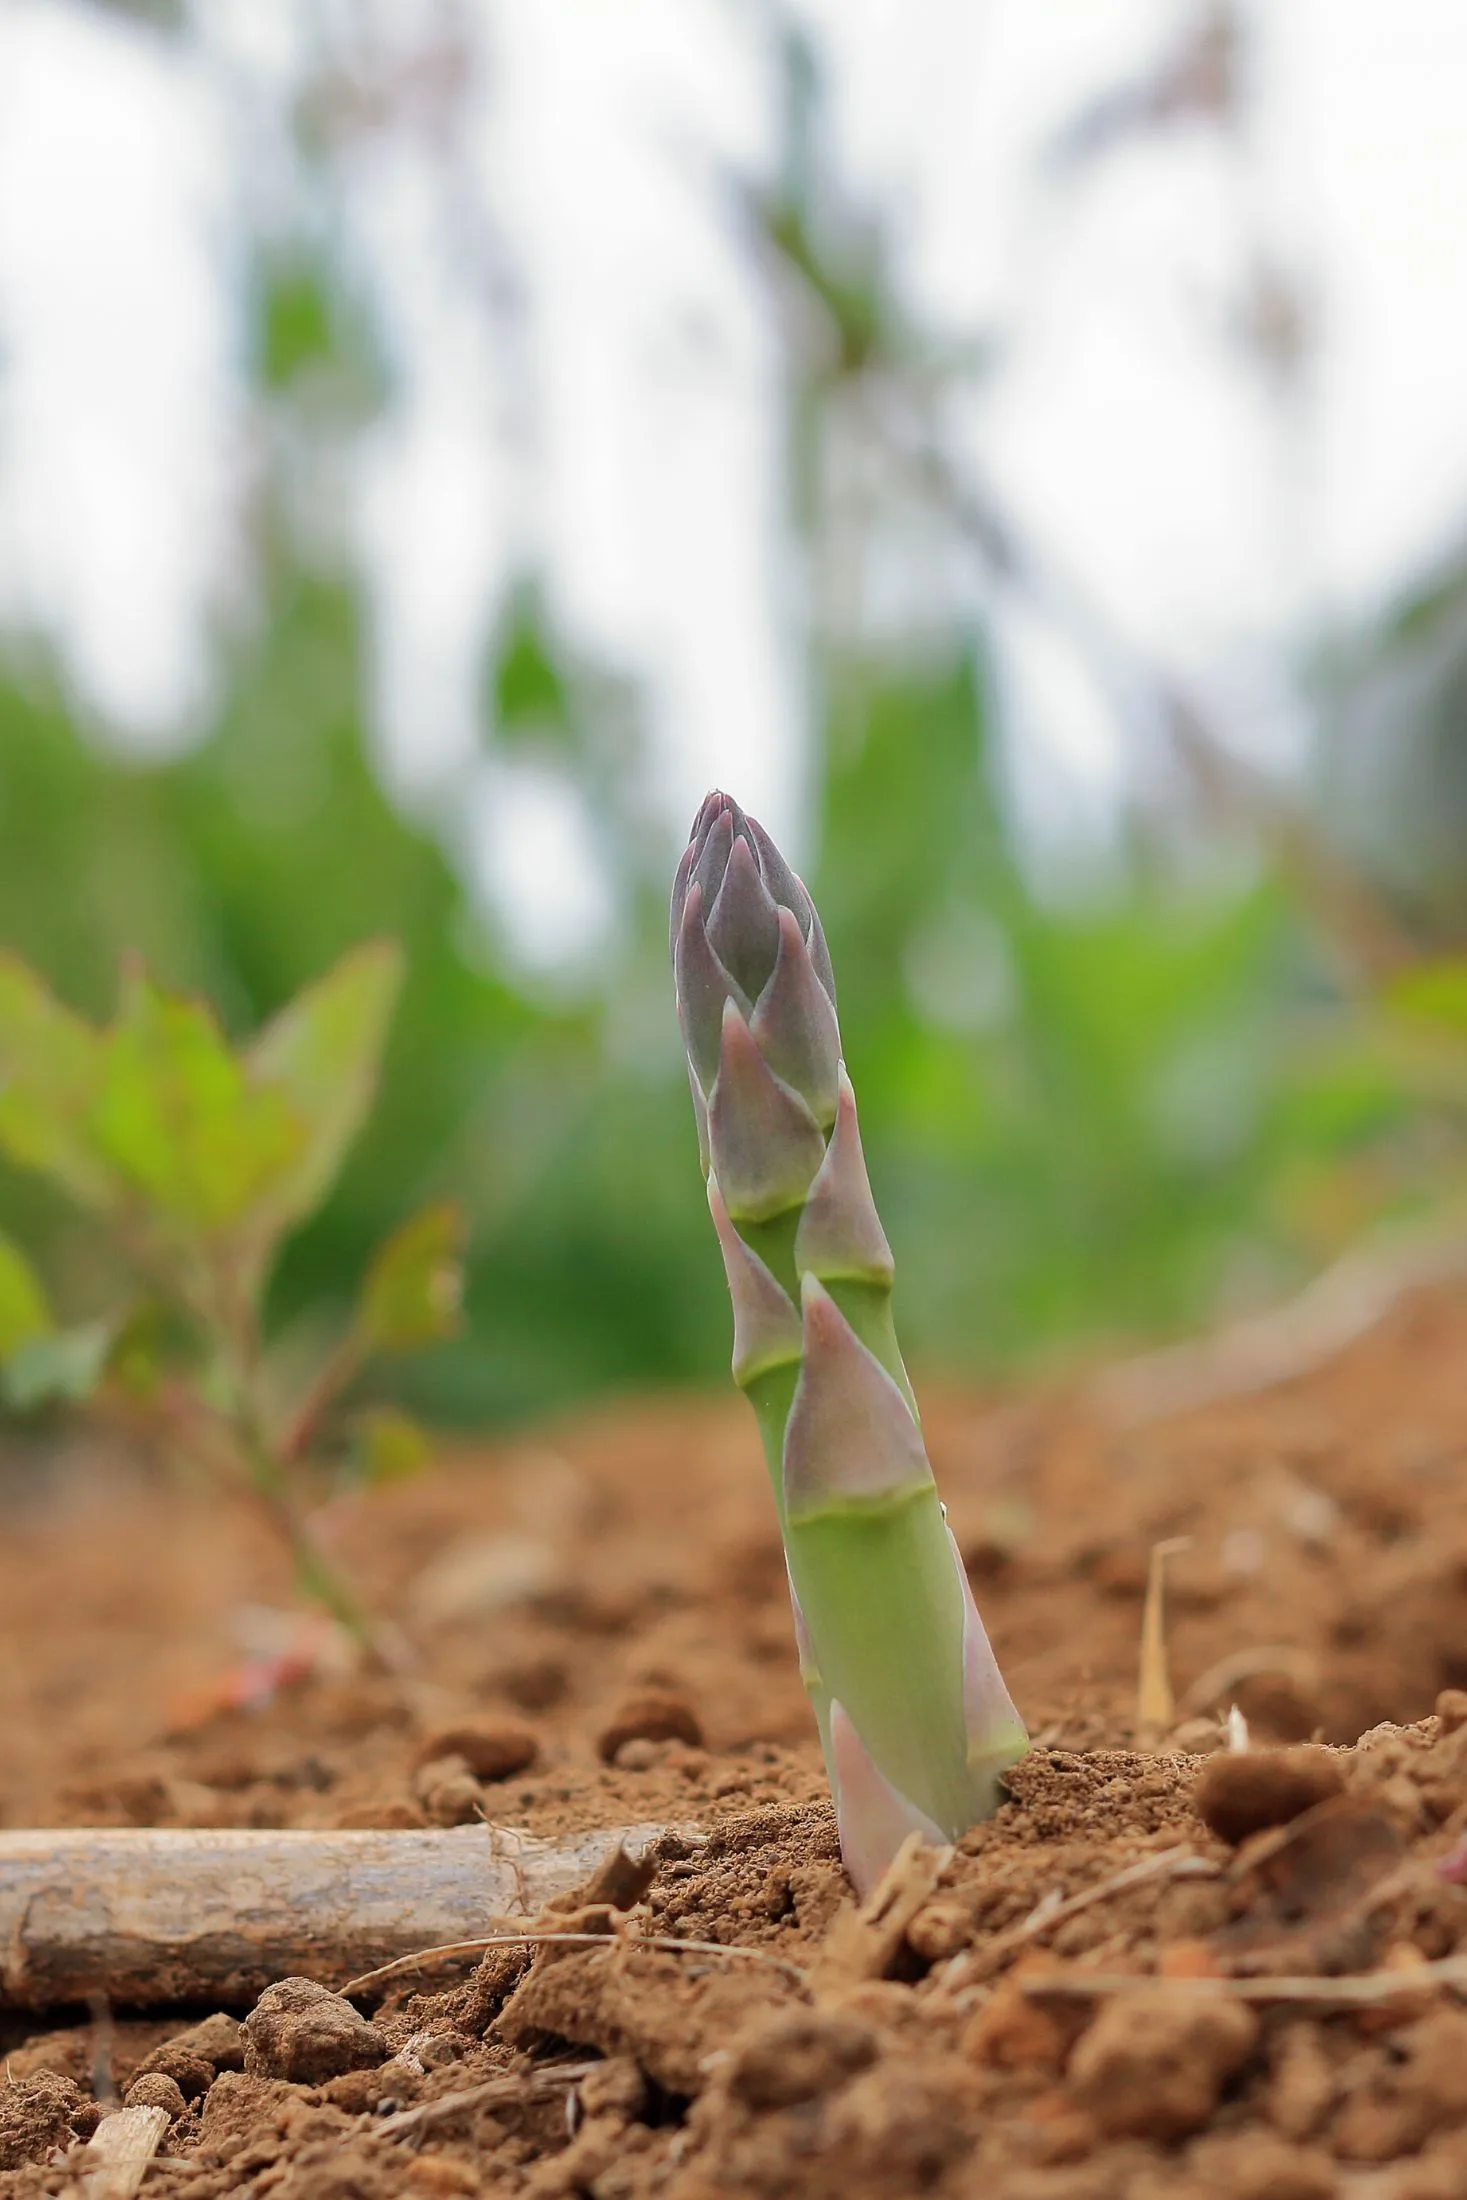 Asparagus sprouting from the ground.